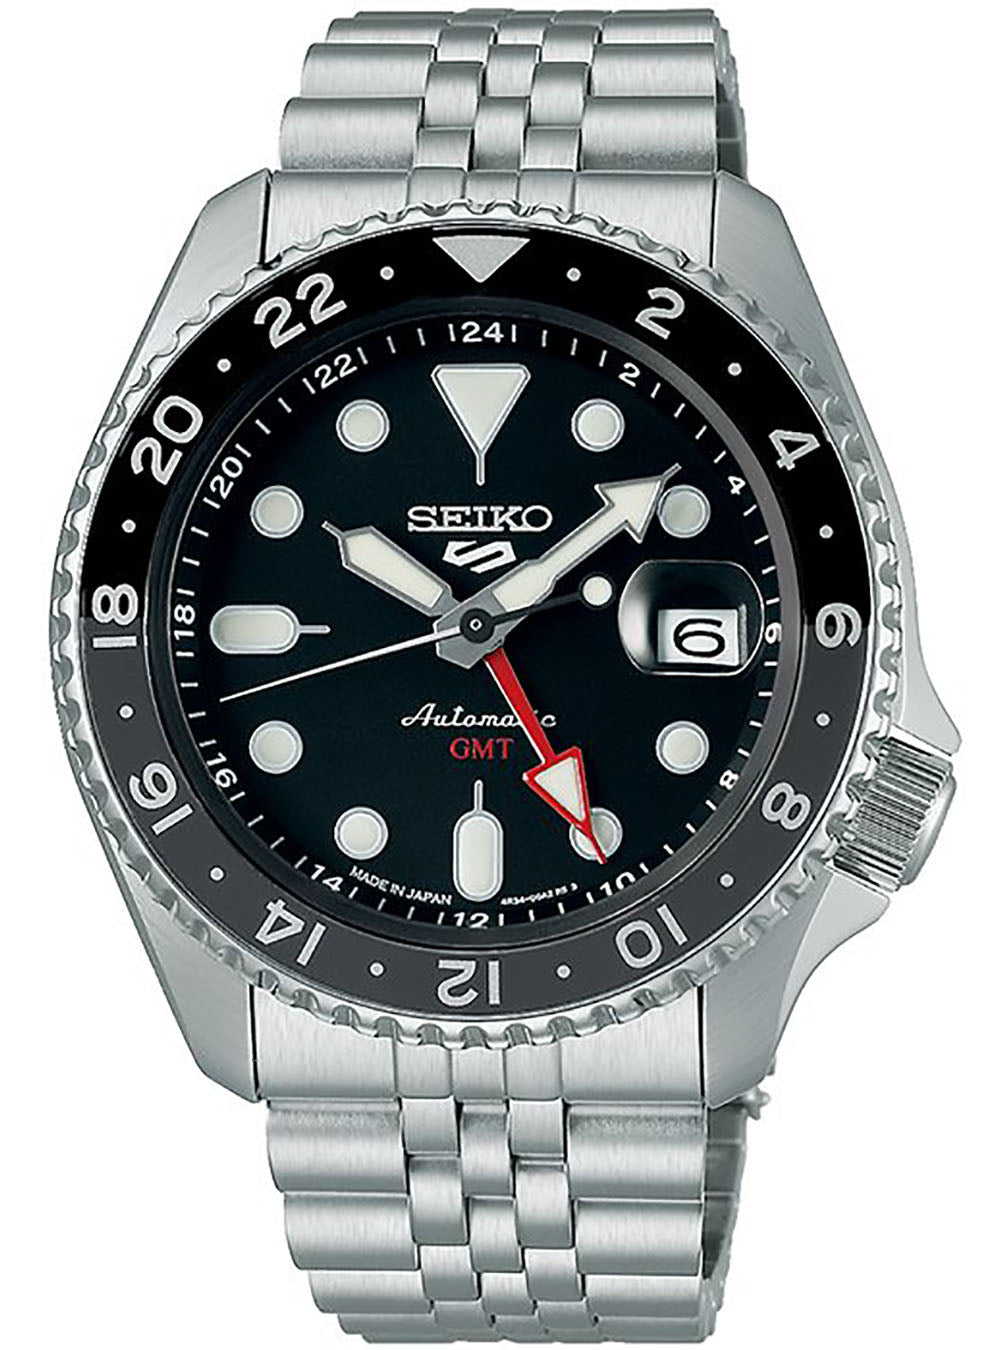 SEIKO 5 SPORTS SKX SPORTS STYLE GMT SBSC001 MADE IN JAPAN JDM